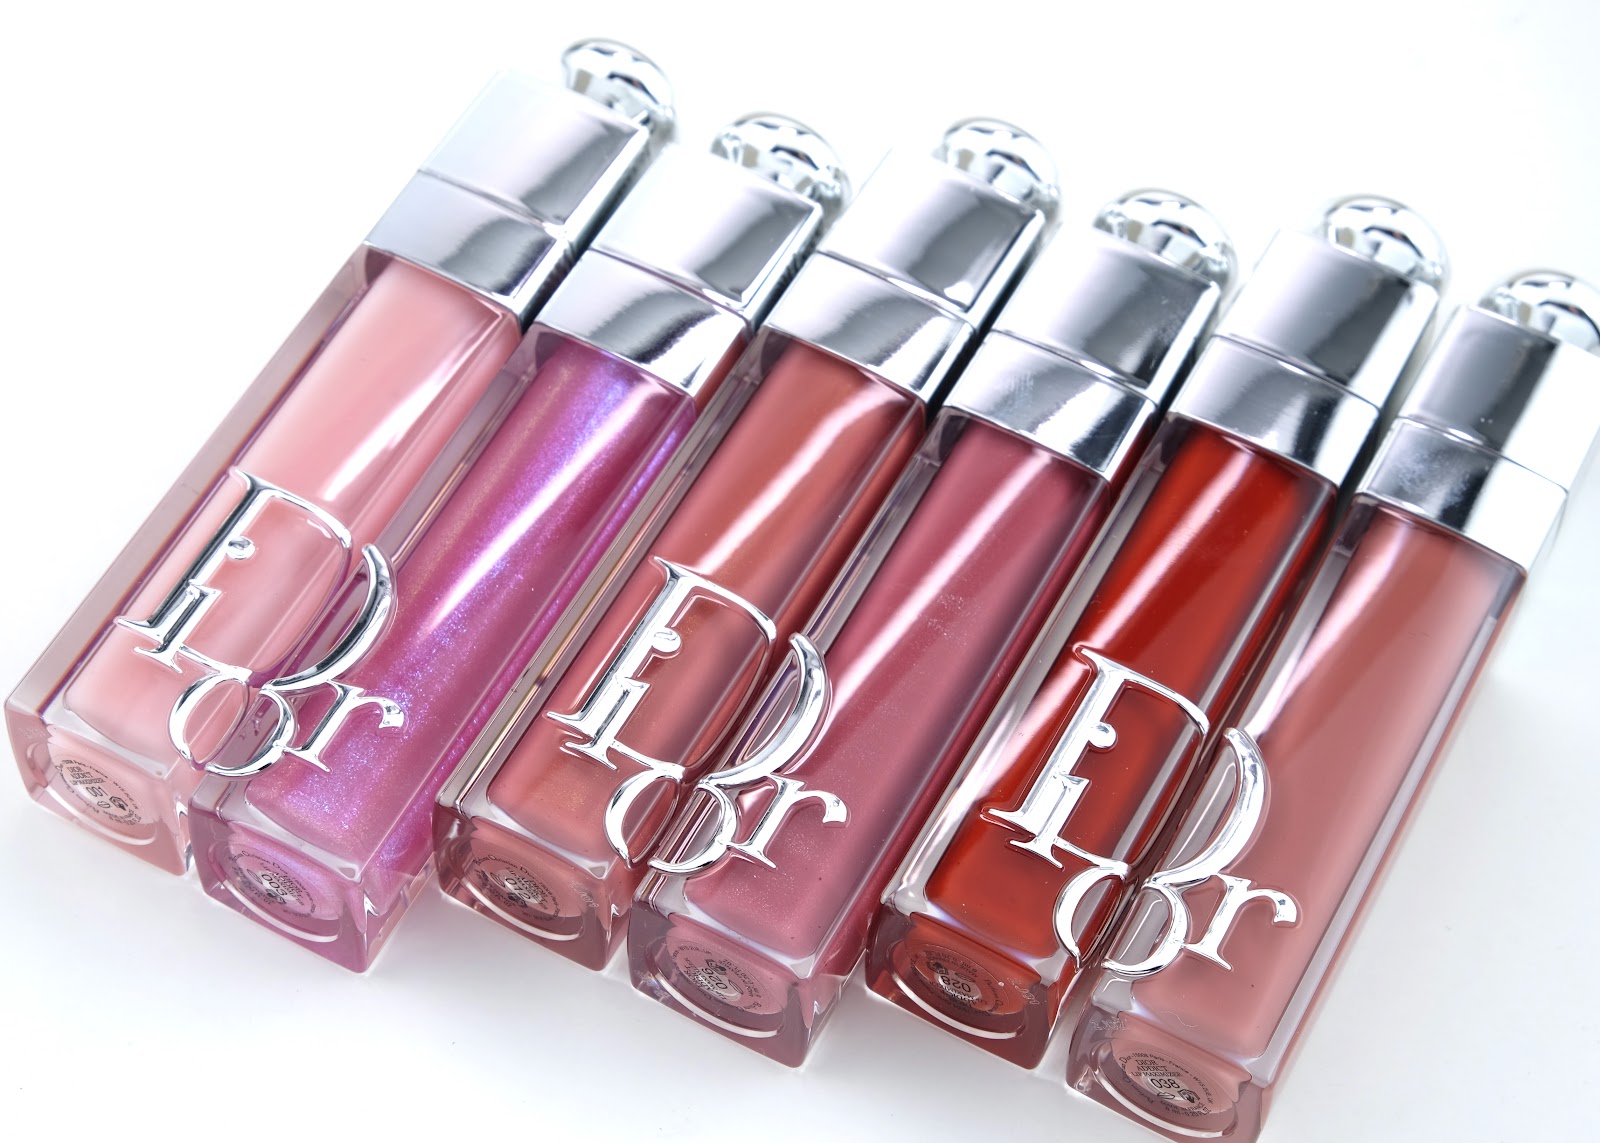 Dior | Dior Addict Lip Maximizer Lip Plumping Gloss: Review and Swatches |  The Happy Sloths: Beauty, Makeup, and Skincare Blog with Reviews and  Swatches